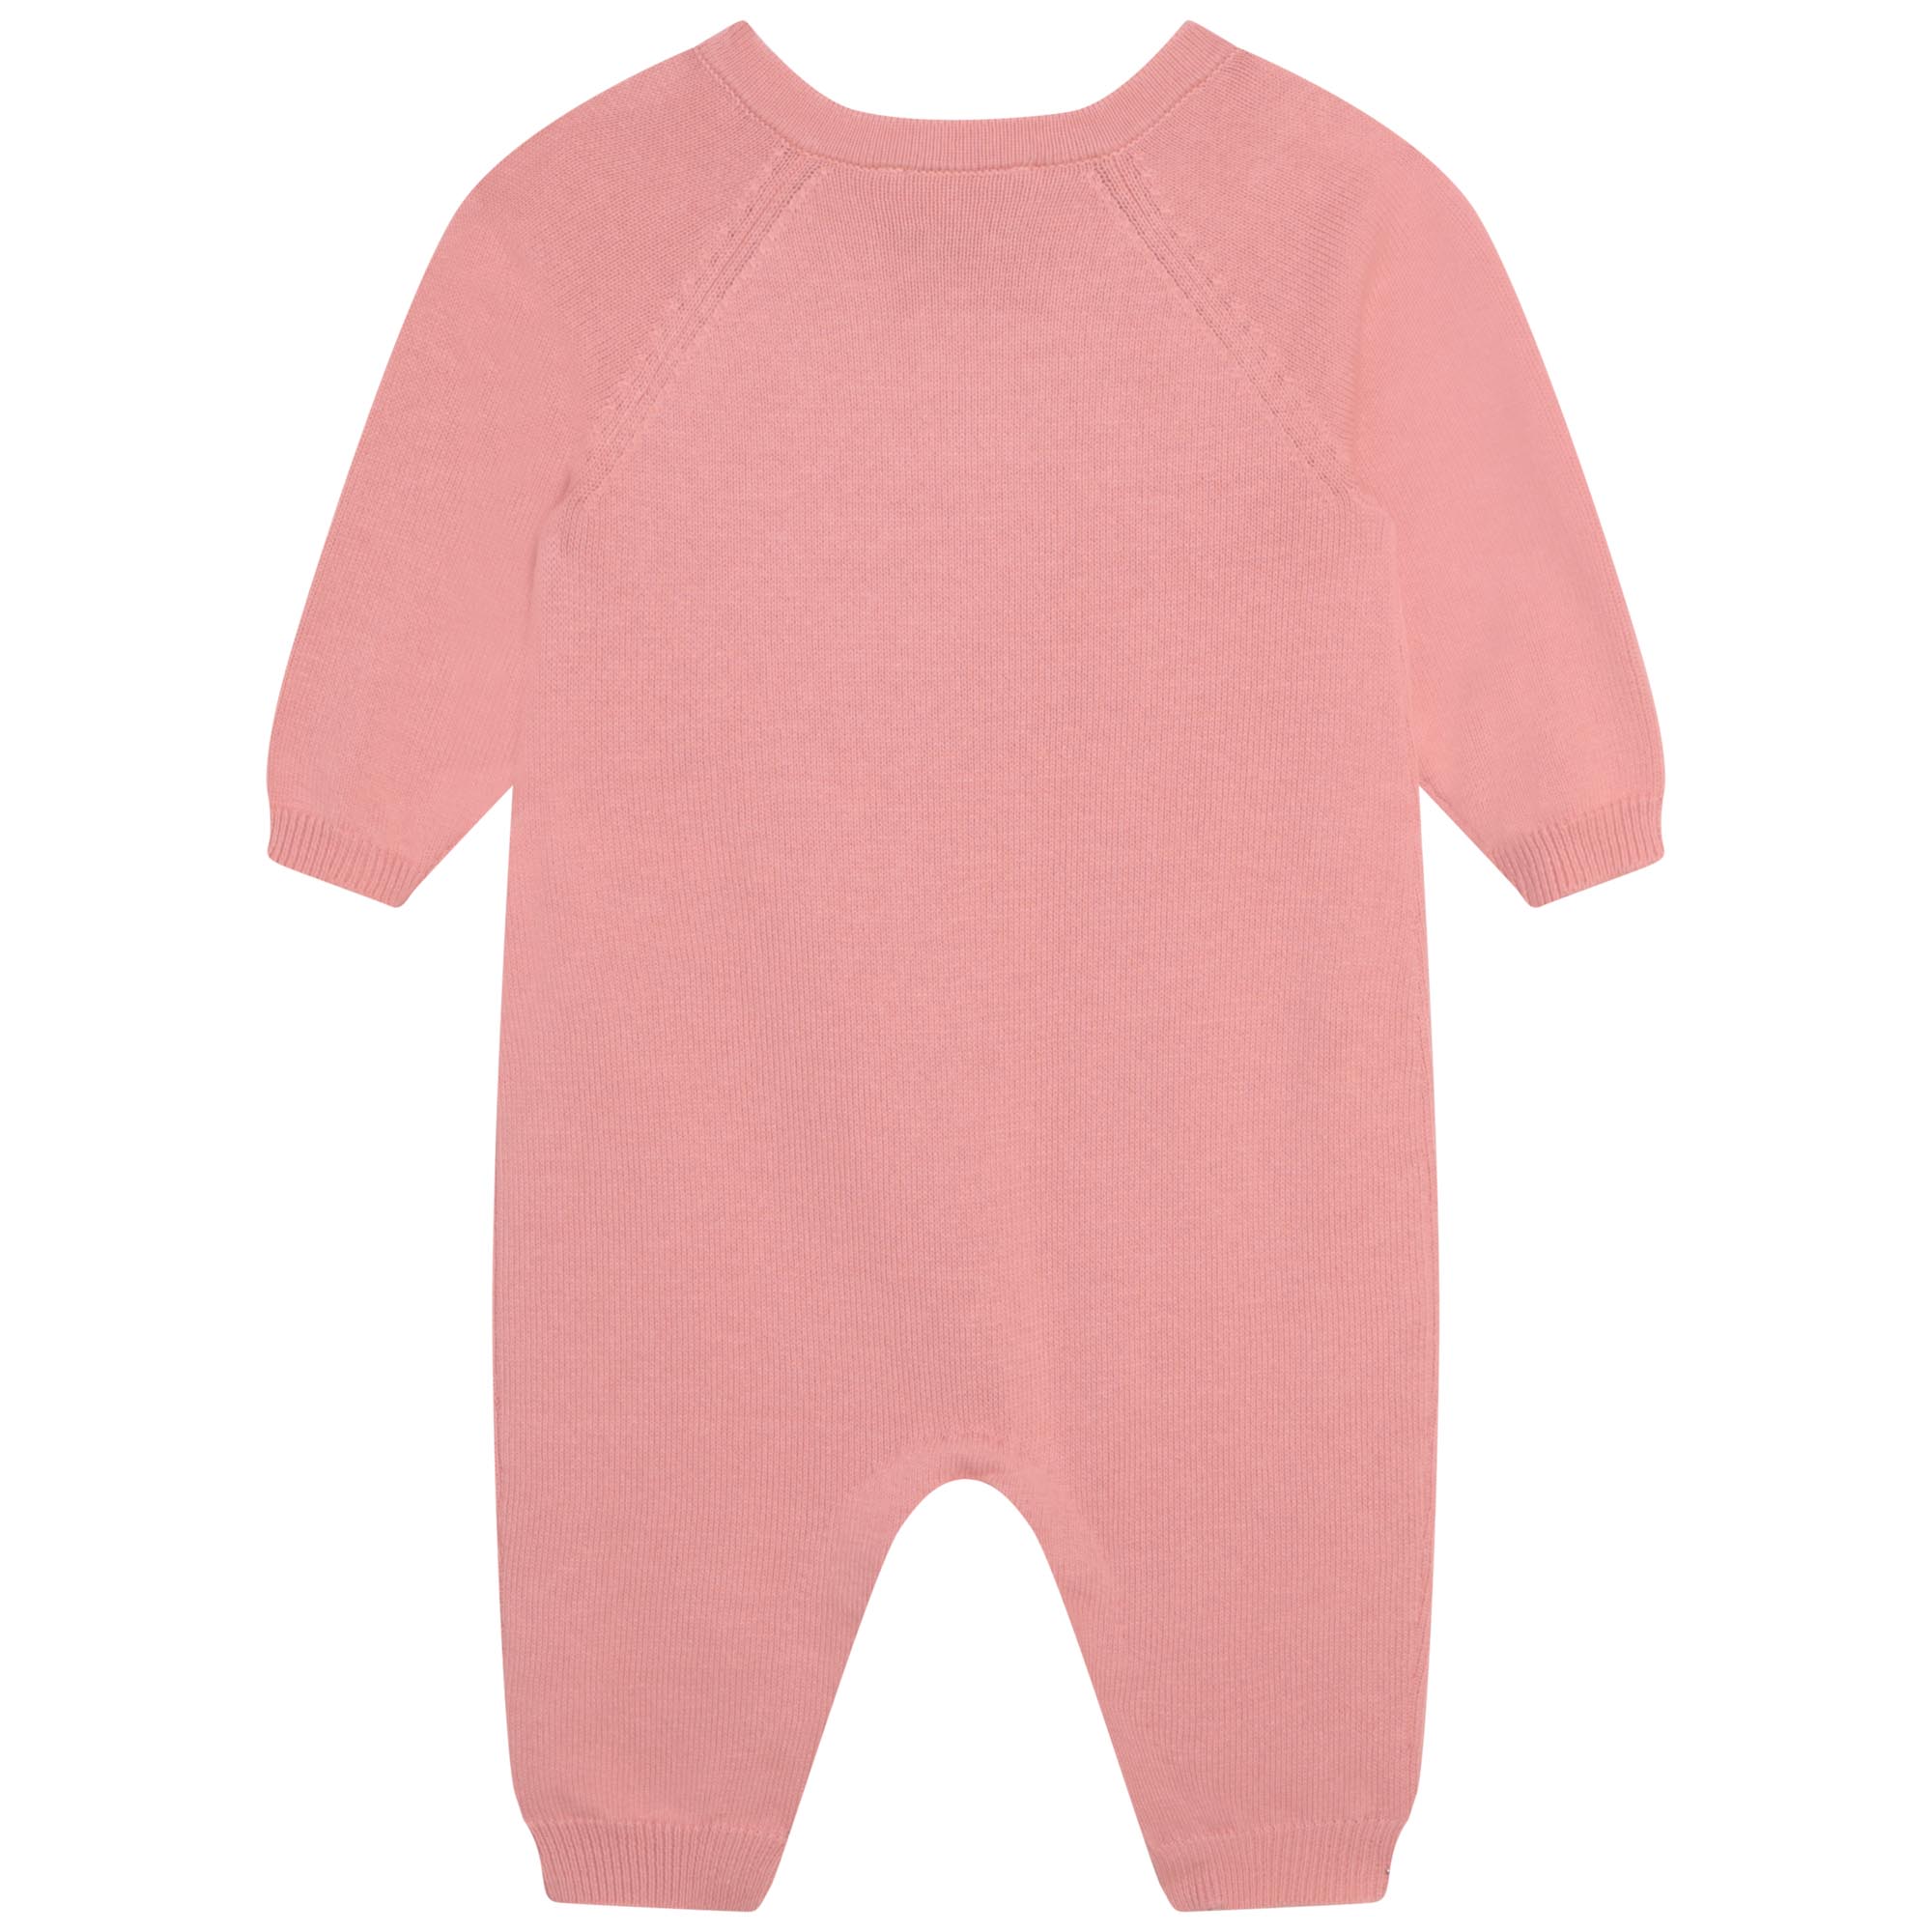 Knitted playsuit KENZO KIDS for GIRL